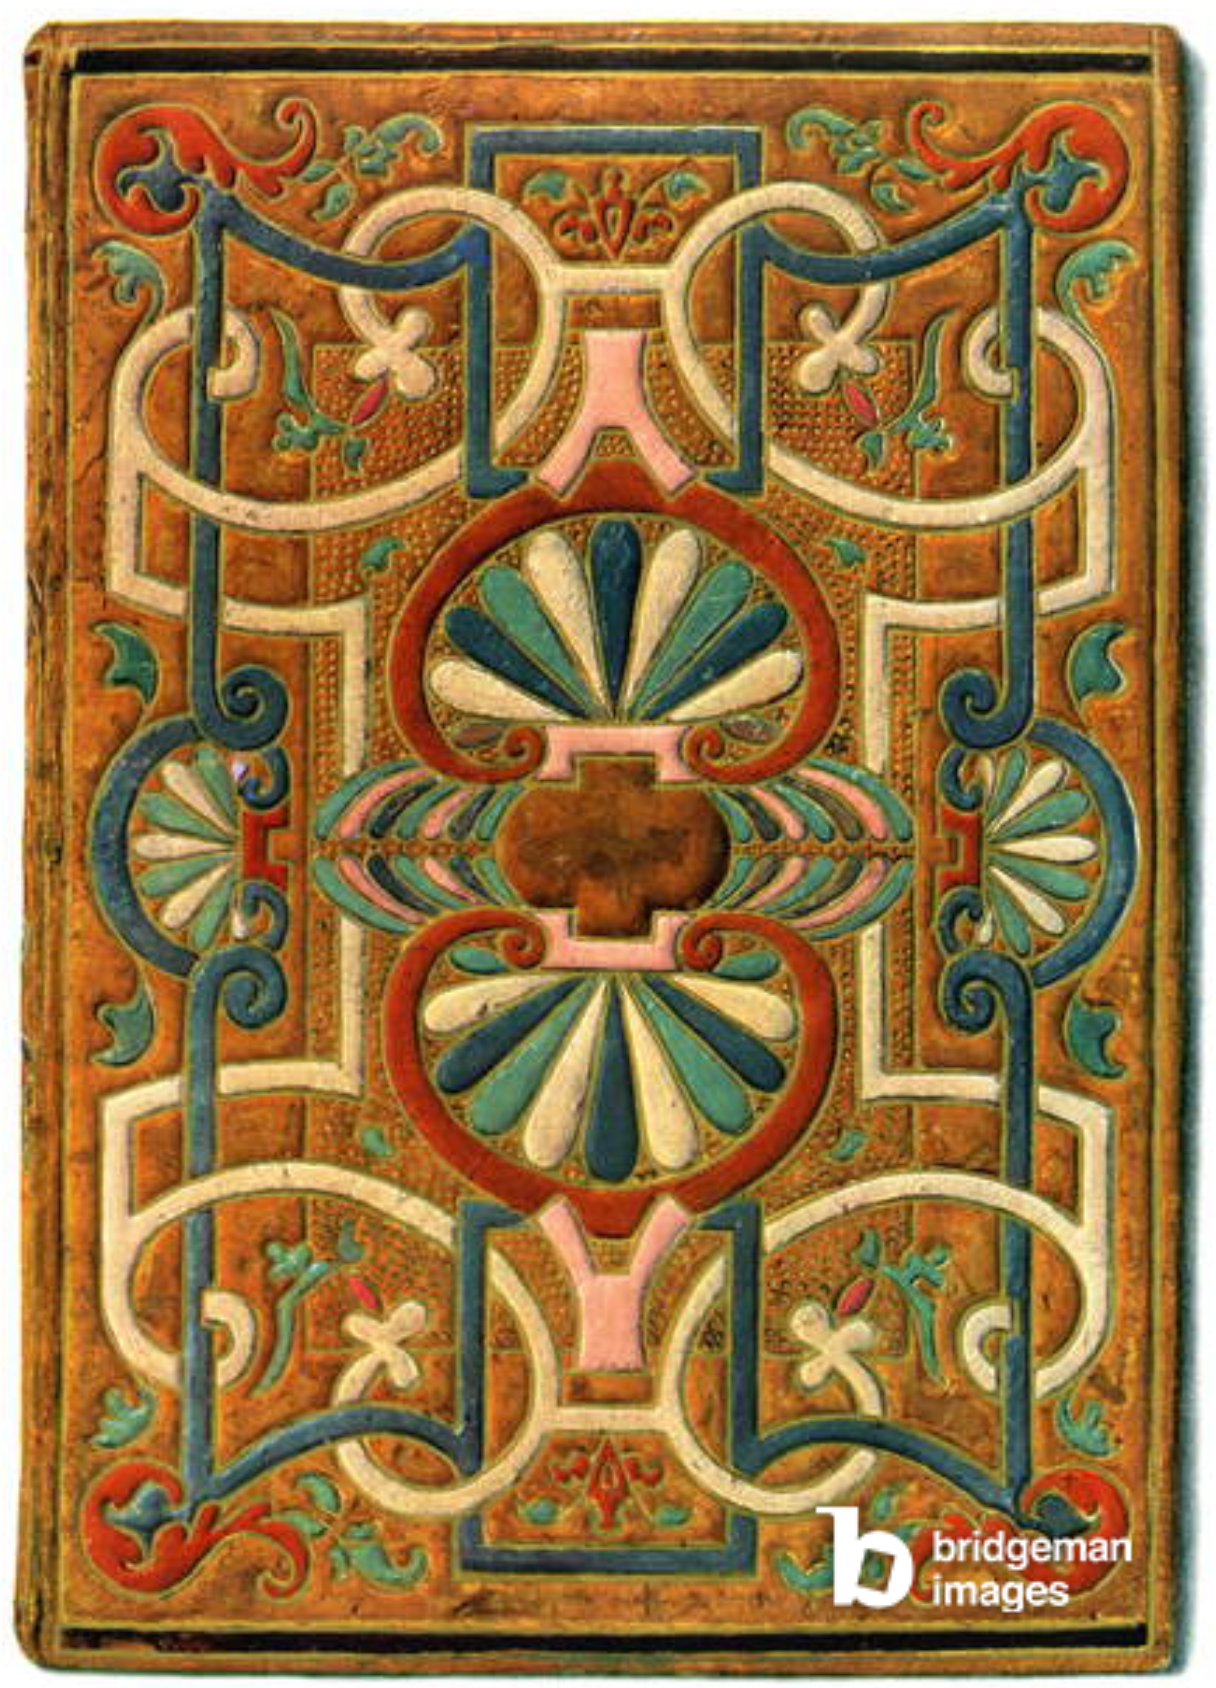 One of the most beautiful bindings in the Bibliothèque nationale de France (Paris): a binding in brown calfskin decorated with interlacing which covers a volume of the Hours of the Virgin printed in Paris in 1549. It is a remarkable example of these rich decorated bindings. by the application of colored pastels, very fashionable in the 16th century / Bibliothèque Nationale, Paris, France / Foto © Gusman / Bridgeman Images